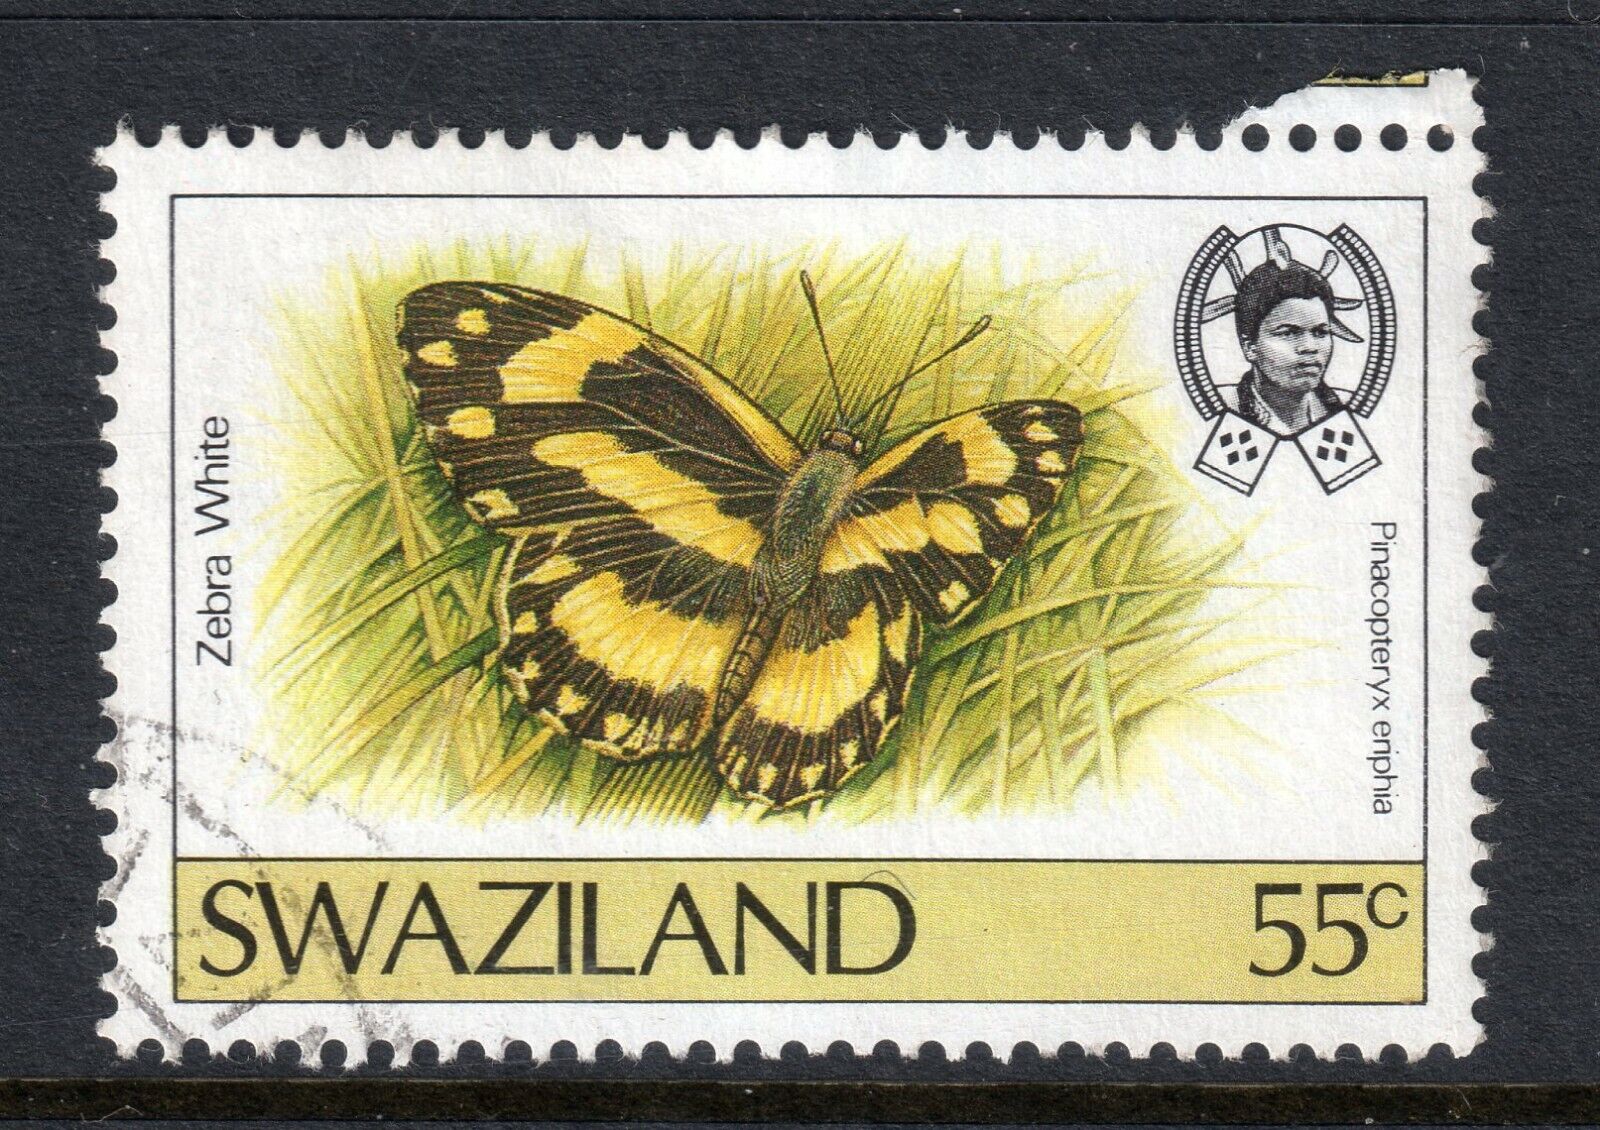 Bargain SWAZILAND = 1987 Lowest price challenge 55c Butterfly. Fine SG 524. ab Used.